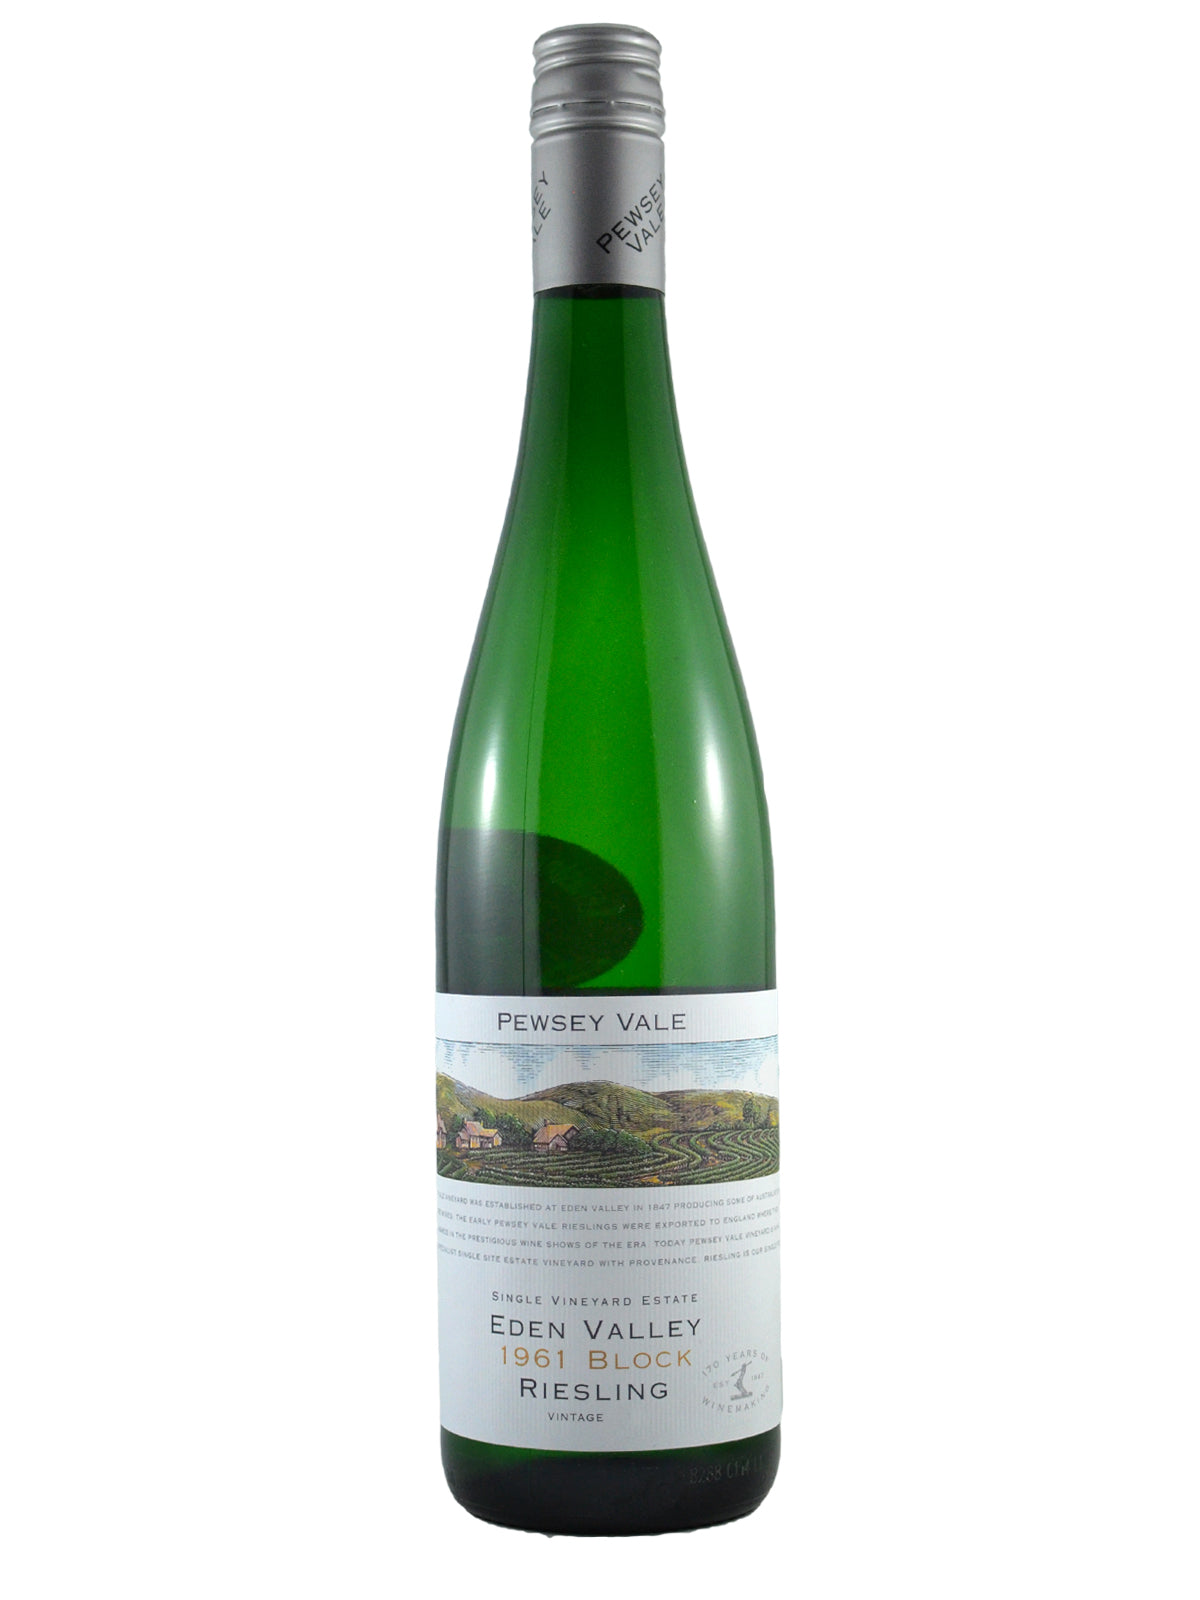 Pewsey Vale '1961 Block' Riesling